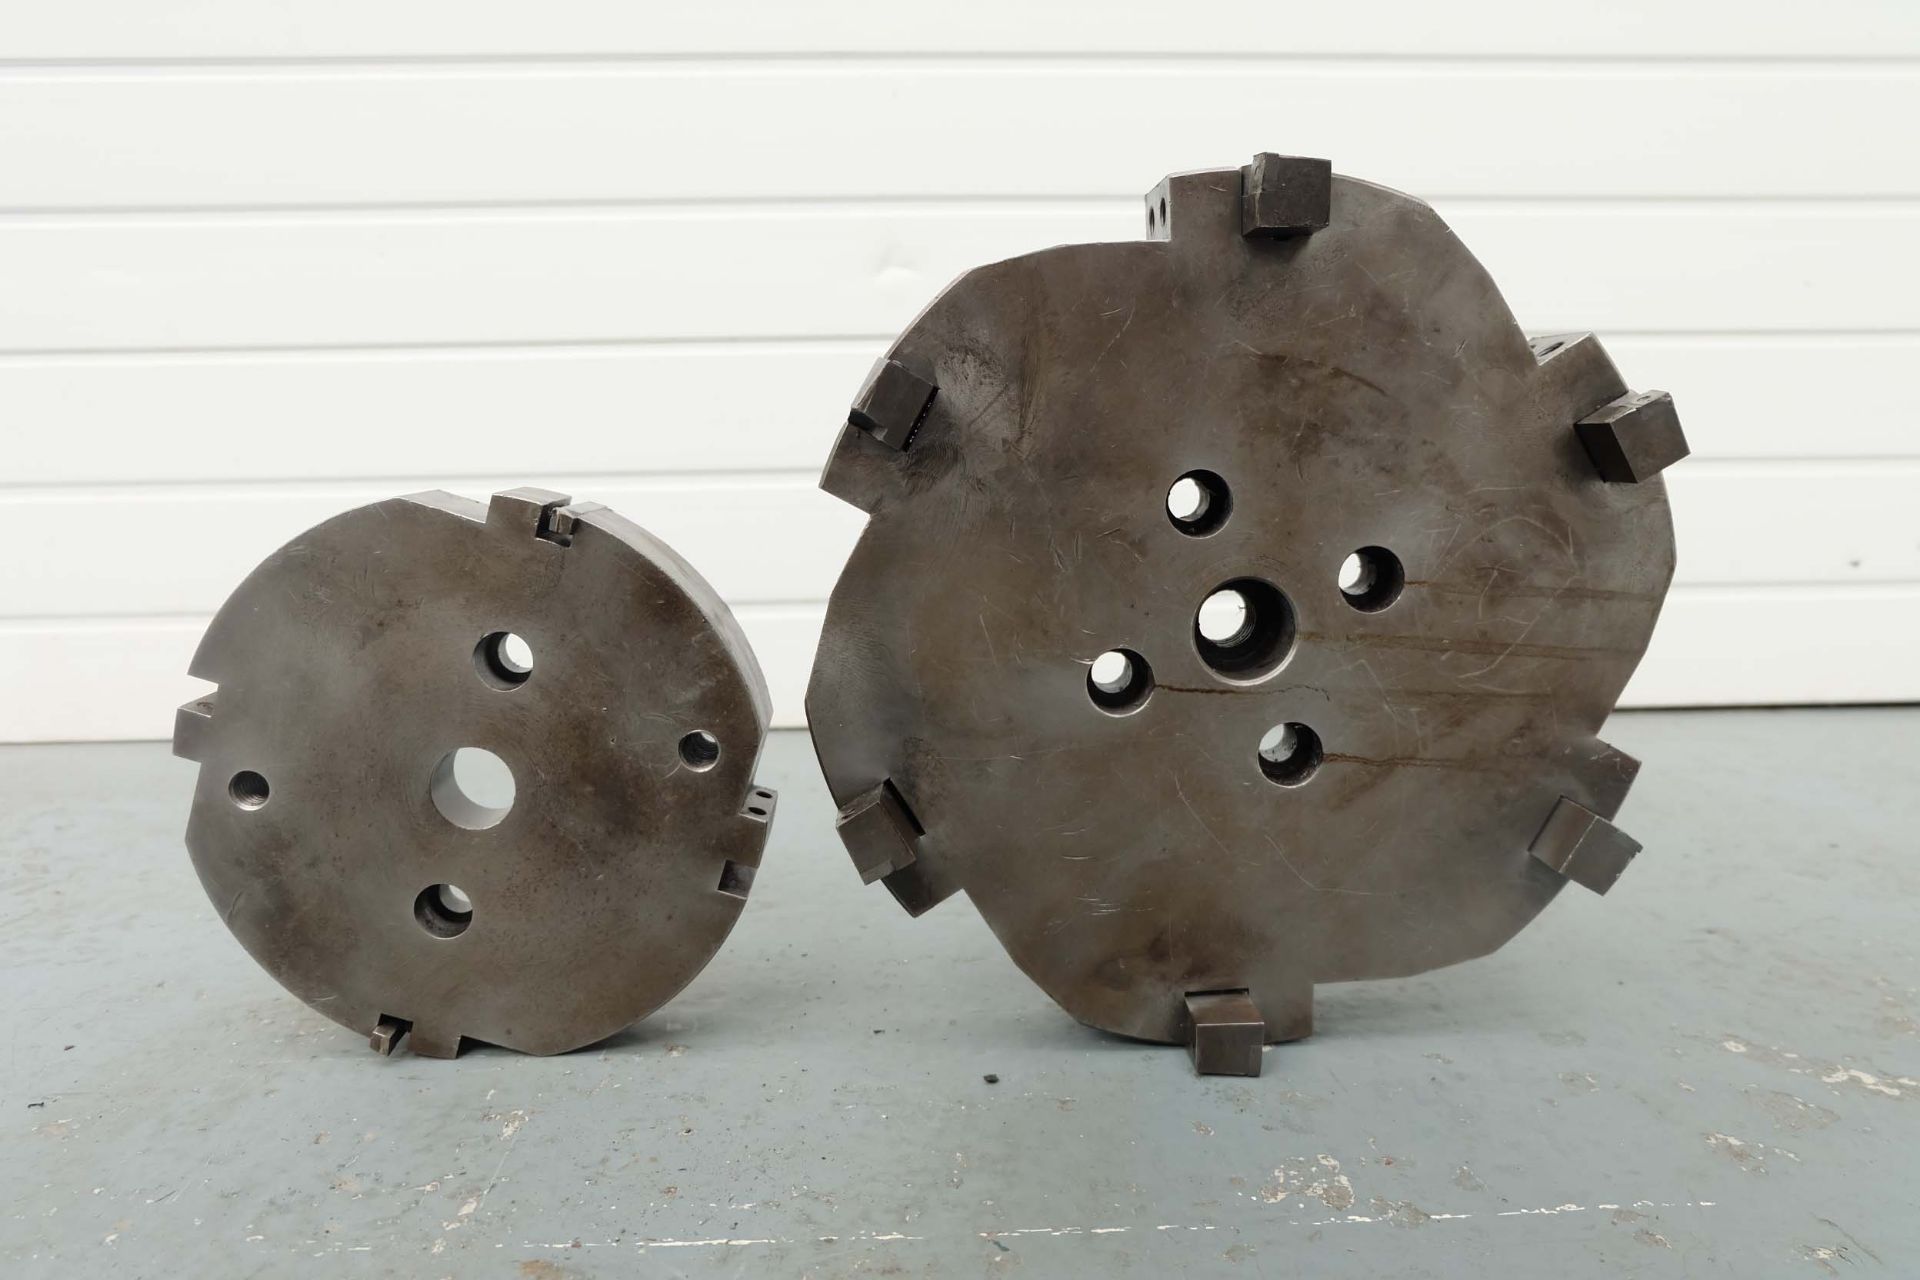 Two Carbide Tipped Milling Fly Cutters. Sizes 13" & 9" Diameter.